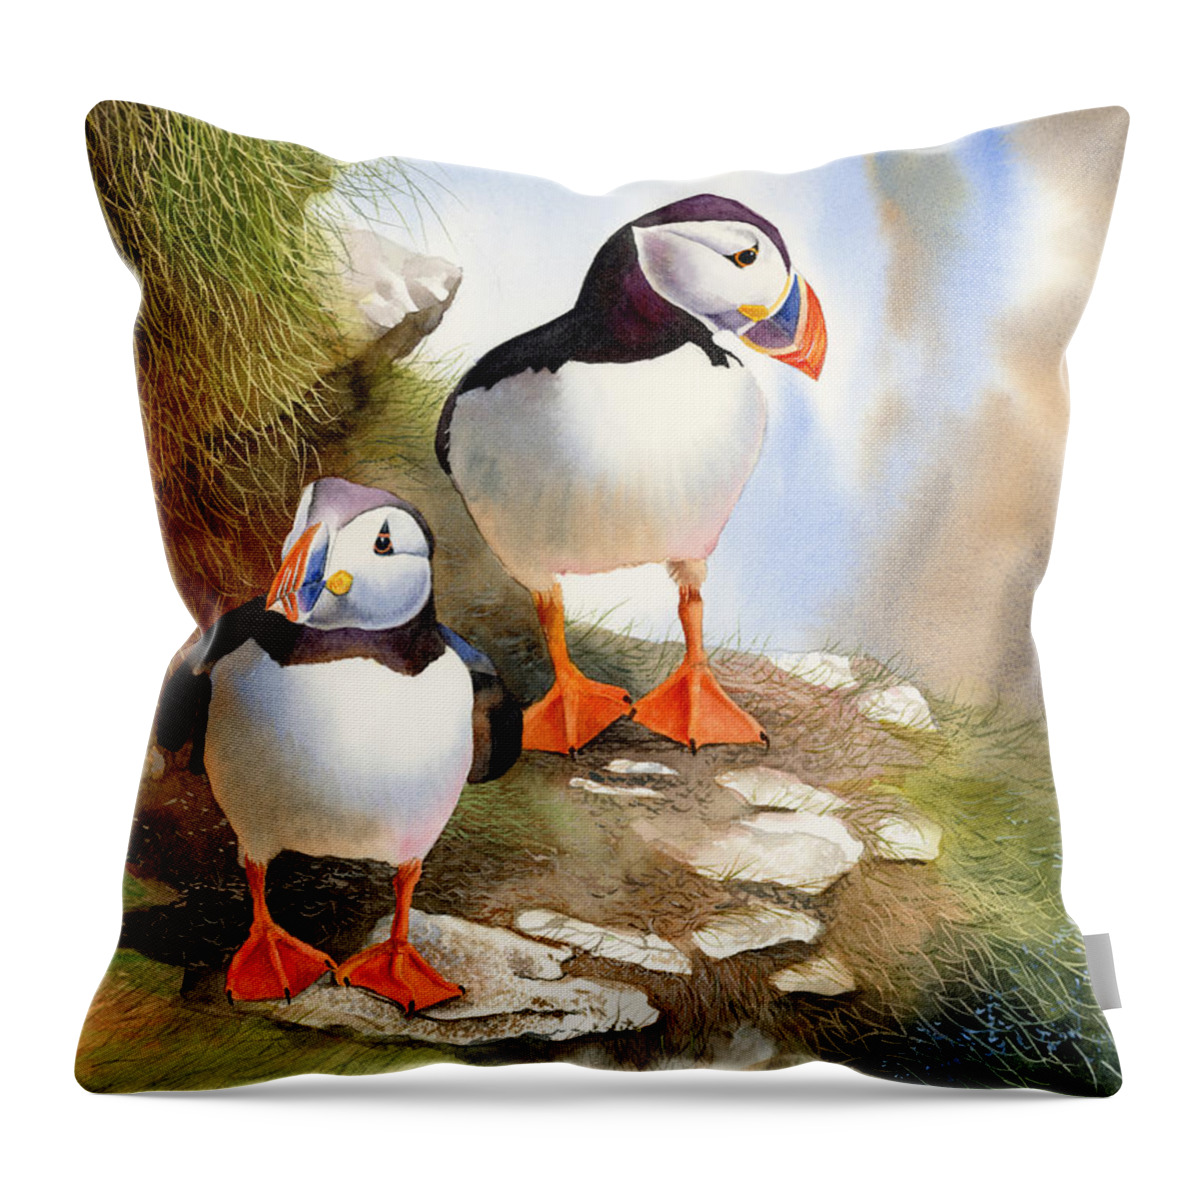 Puffins Throw Pillow featuring the painting Puffins by Espero Art